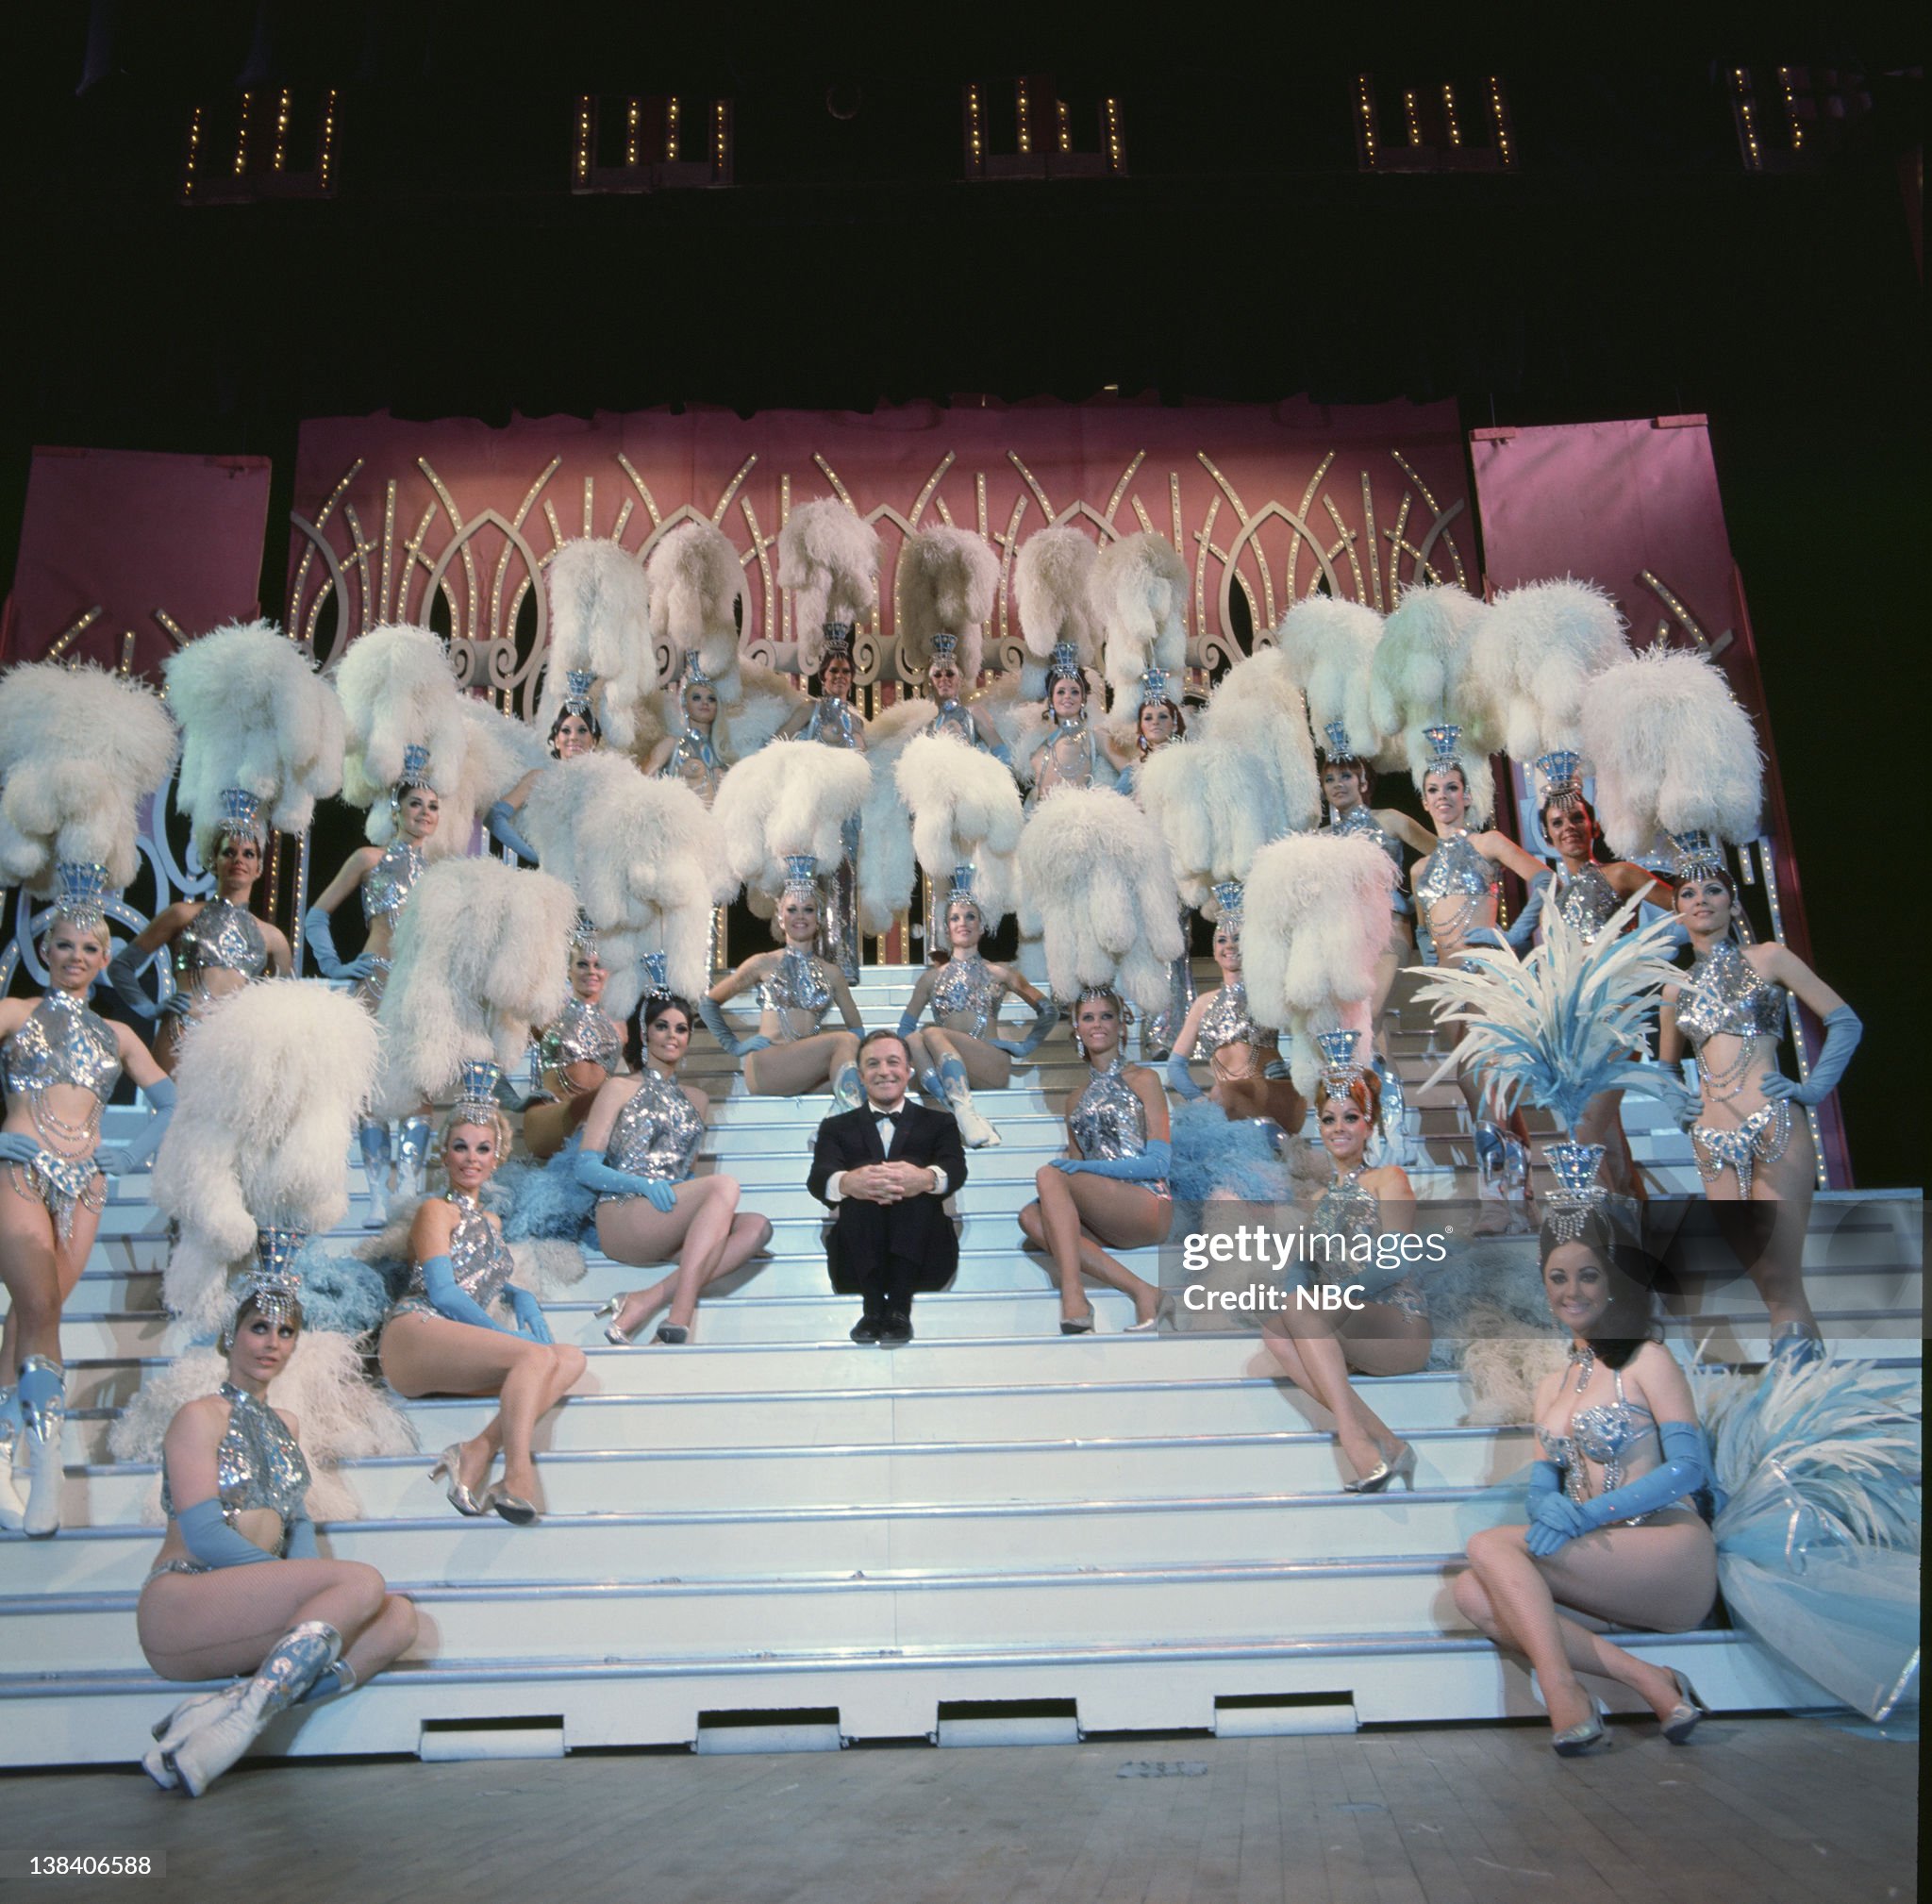 Gene Kelly’s wonderful world of girls, aired on 14 January 1970. Pictured: Gene Kelly, center, with the Folies Bergere Showgirls. 